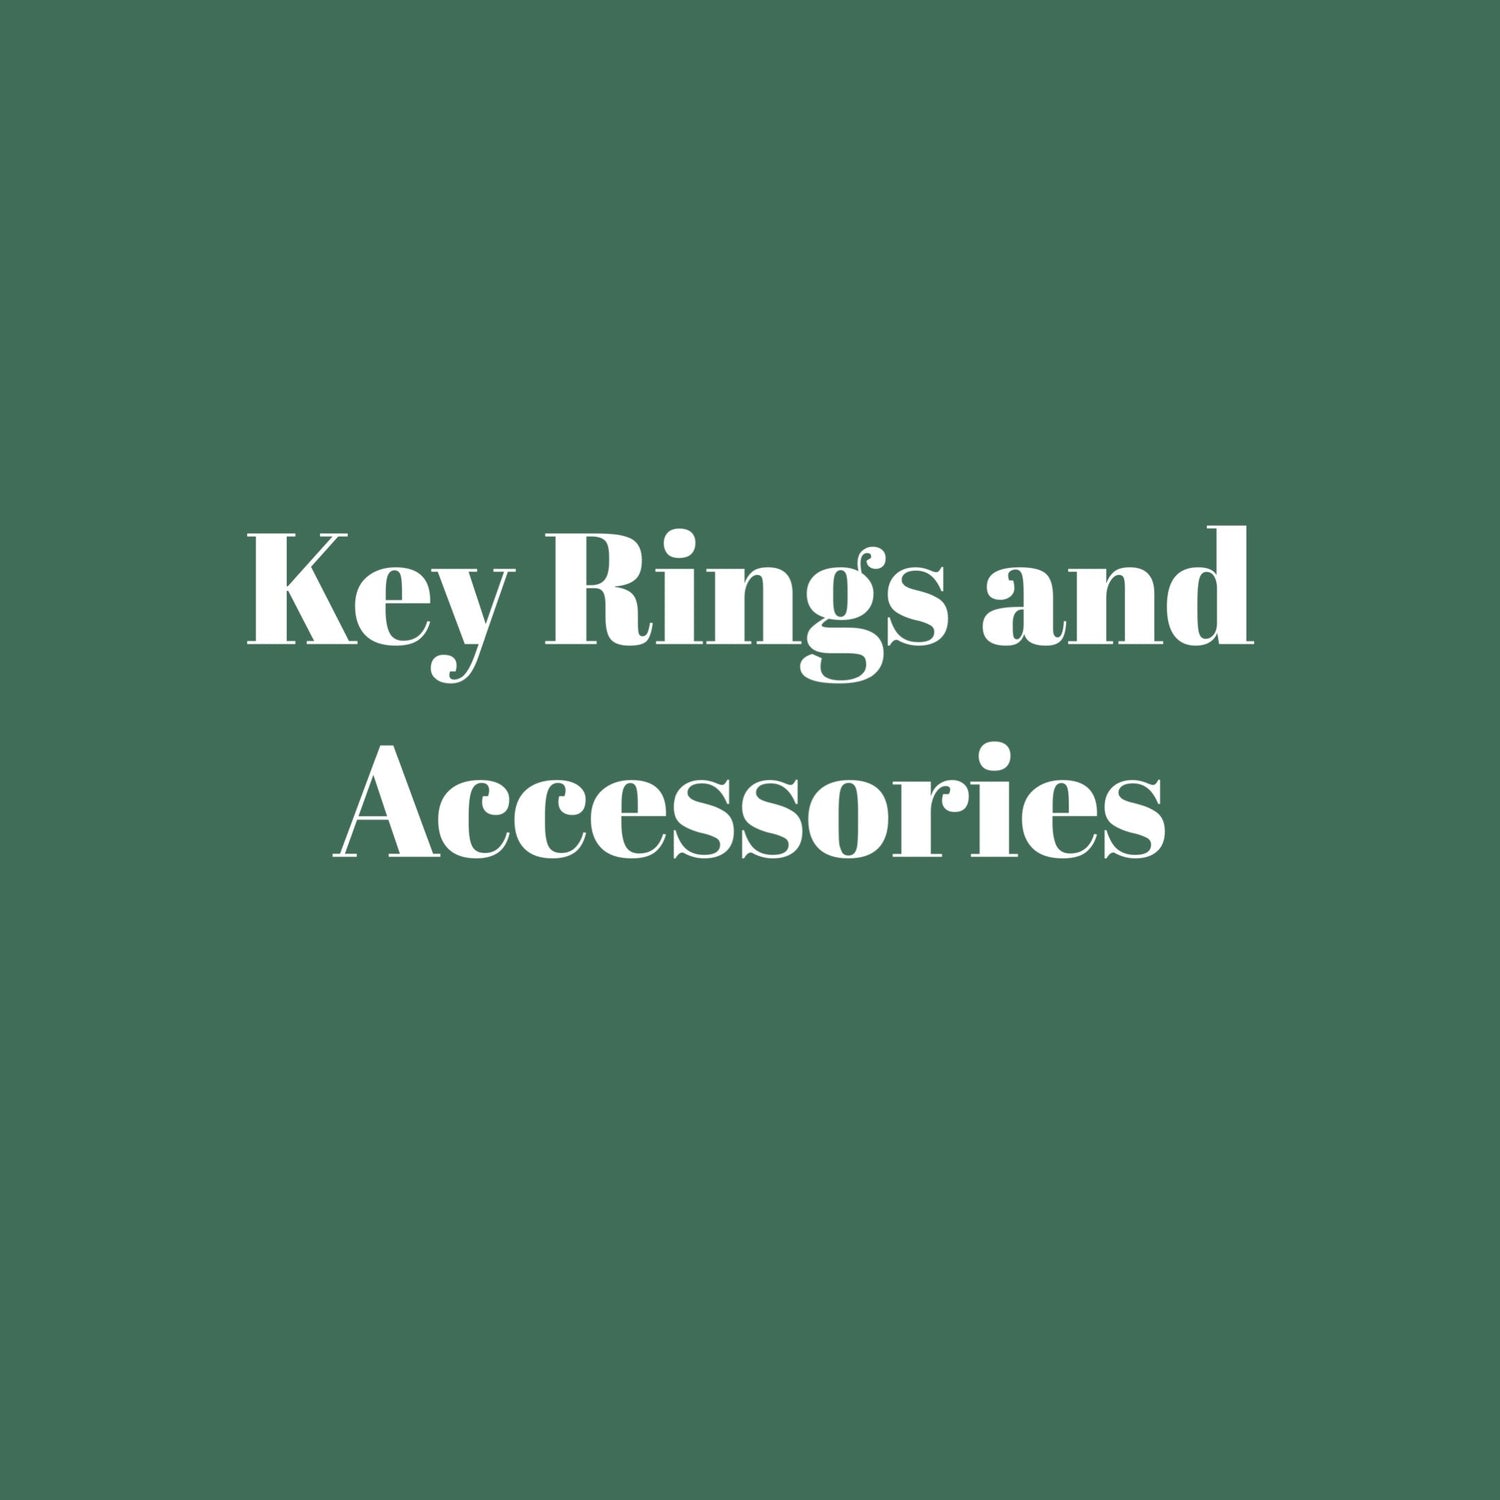 Key Rings and Accessories